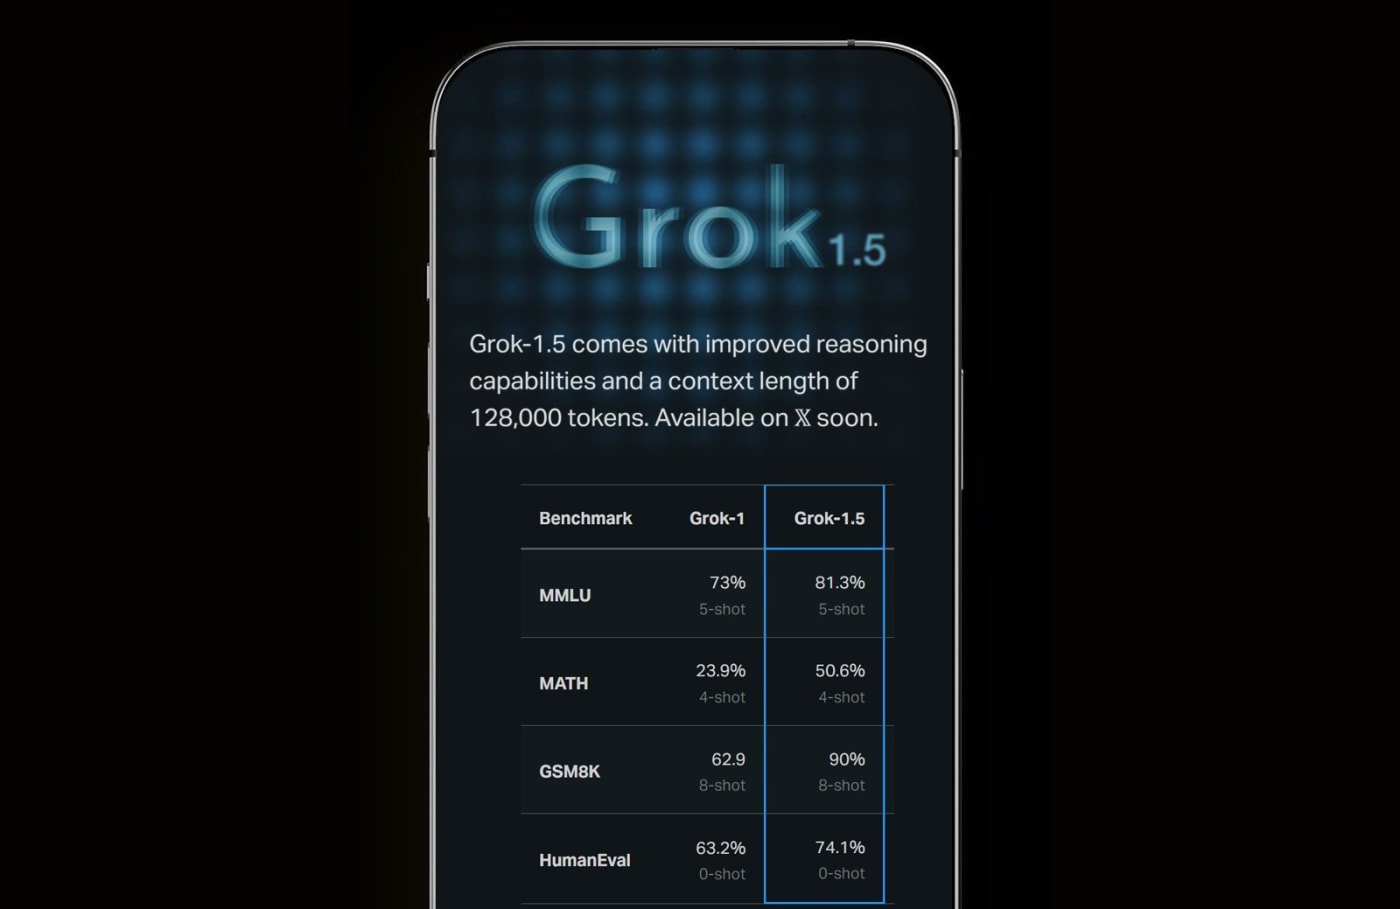 The latest version of xAI's Grok can process images